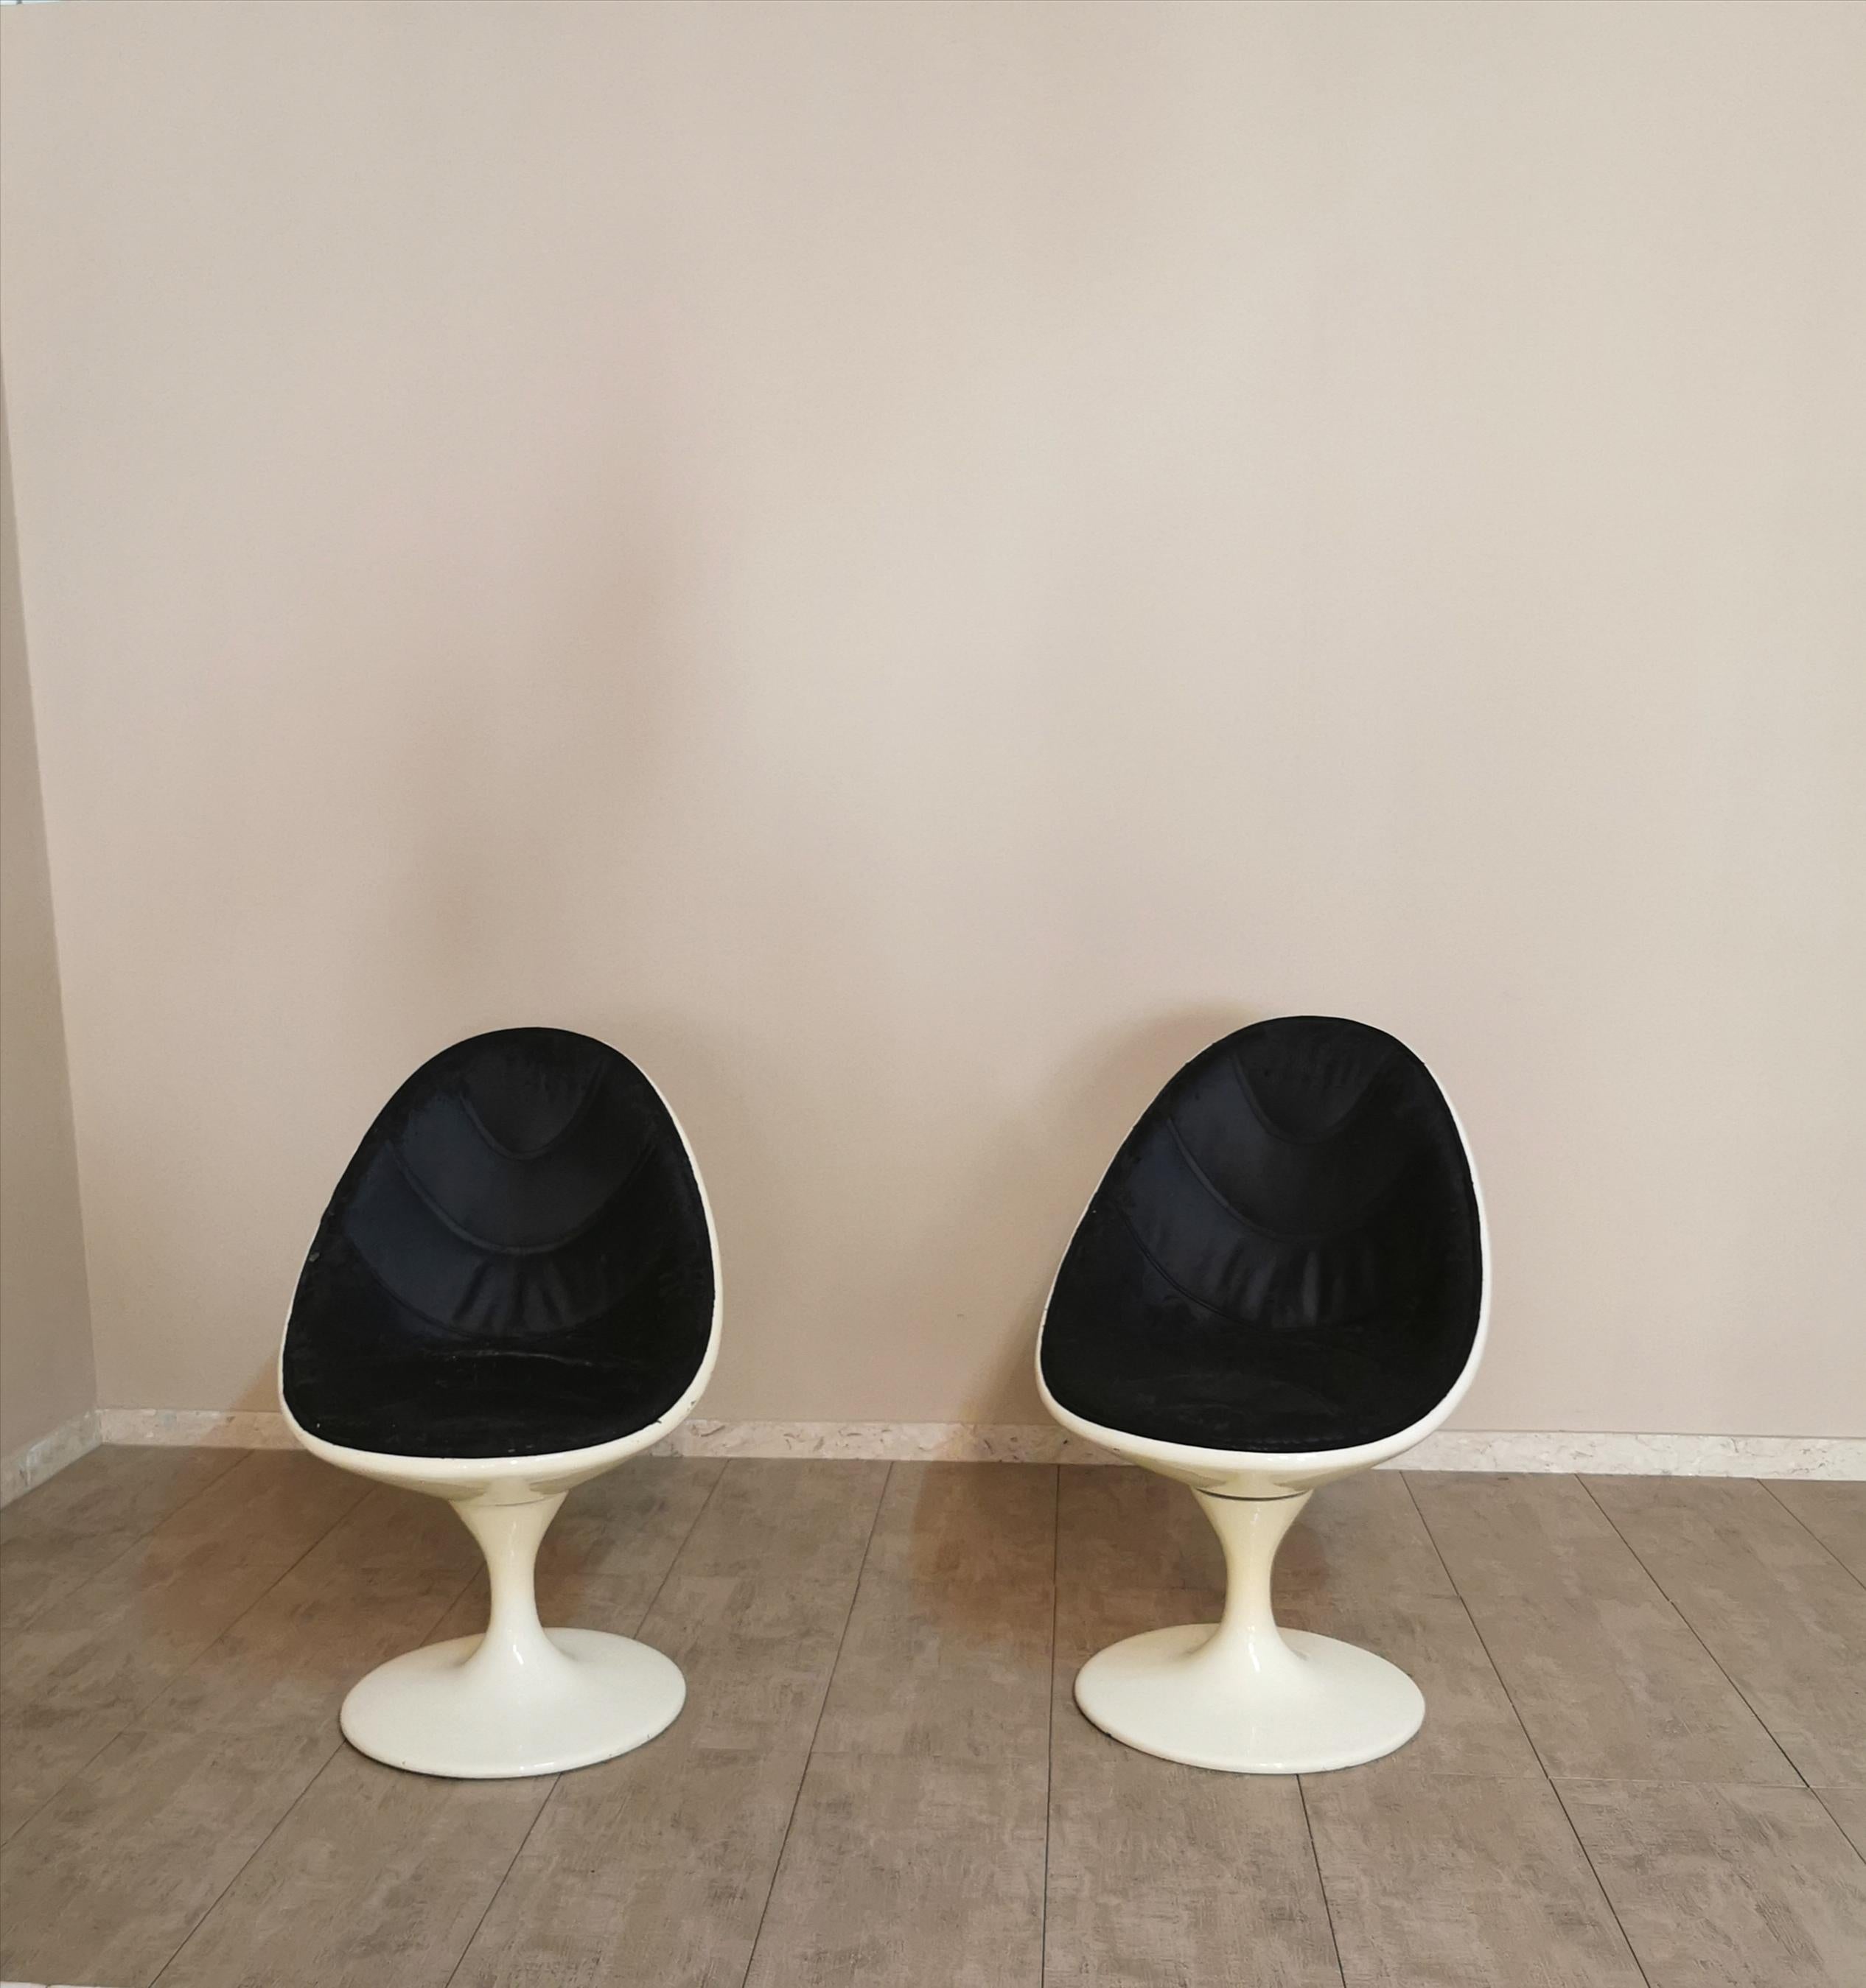 Midcentury Swivel Chairs Curved Resin Black White Leather Italy 1970s Set of 2 1